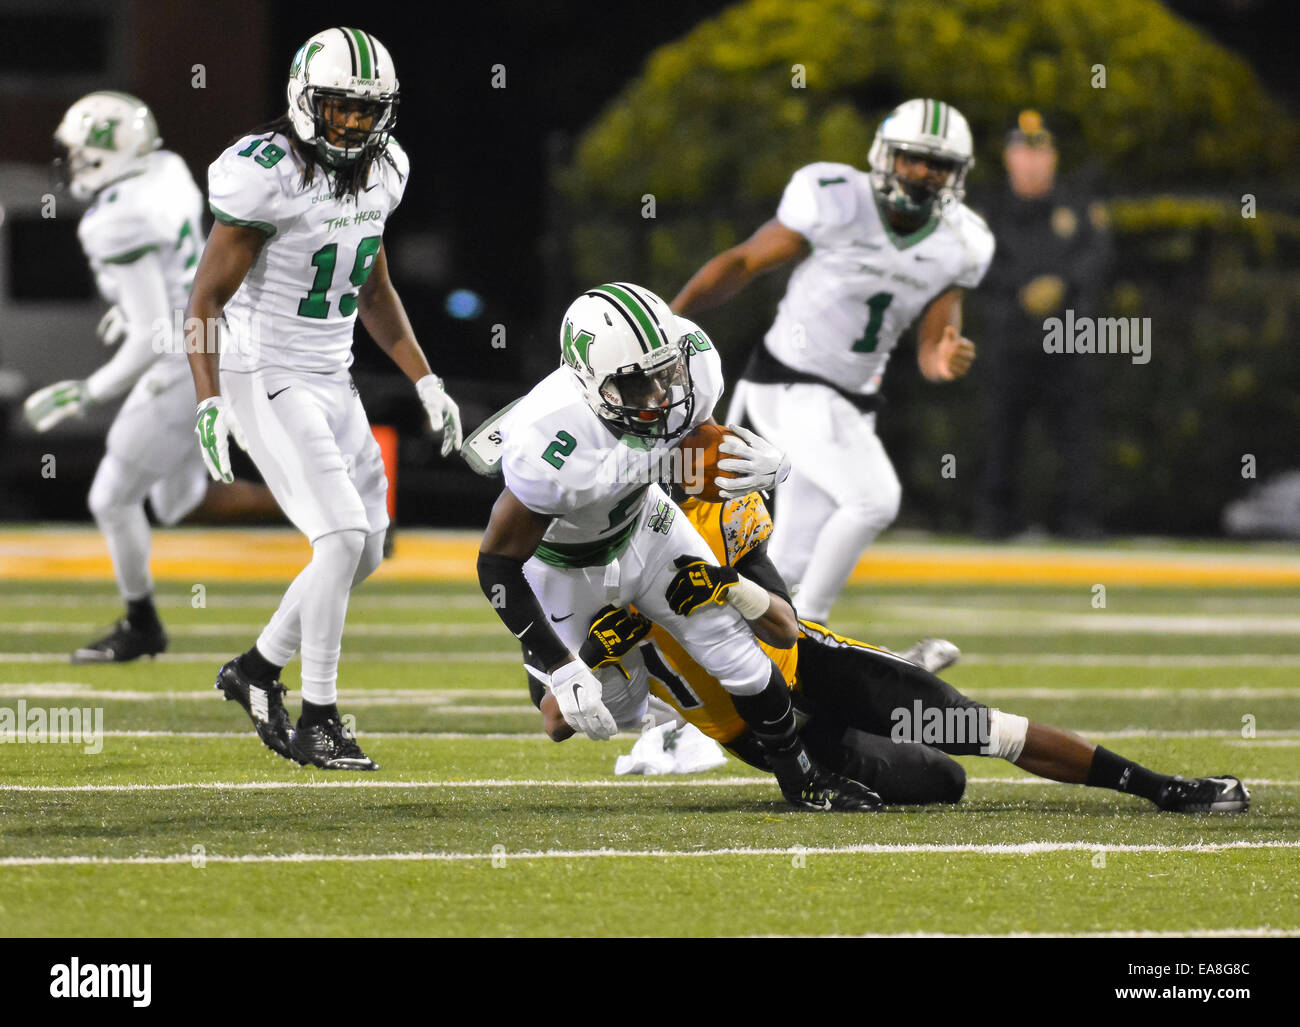 November 8, 2014:Marshall Thundering Herd wide receiver Hyleck Foster (2) is tackled by Southern Miss Golden Eagles defensive back Xavier Marion (1) during the NCAA Football game between the Southern Miss Golden Eagles and the Marshall Thundering Herd at M.M. Roberts Stadium in Hattiesburg MS. Matt Bush/CSM Stock Photo